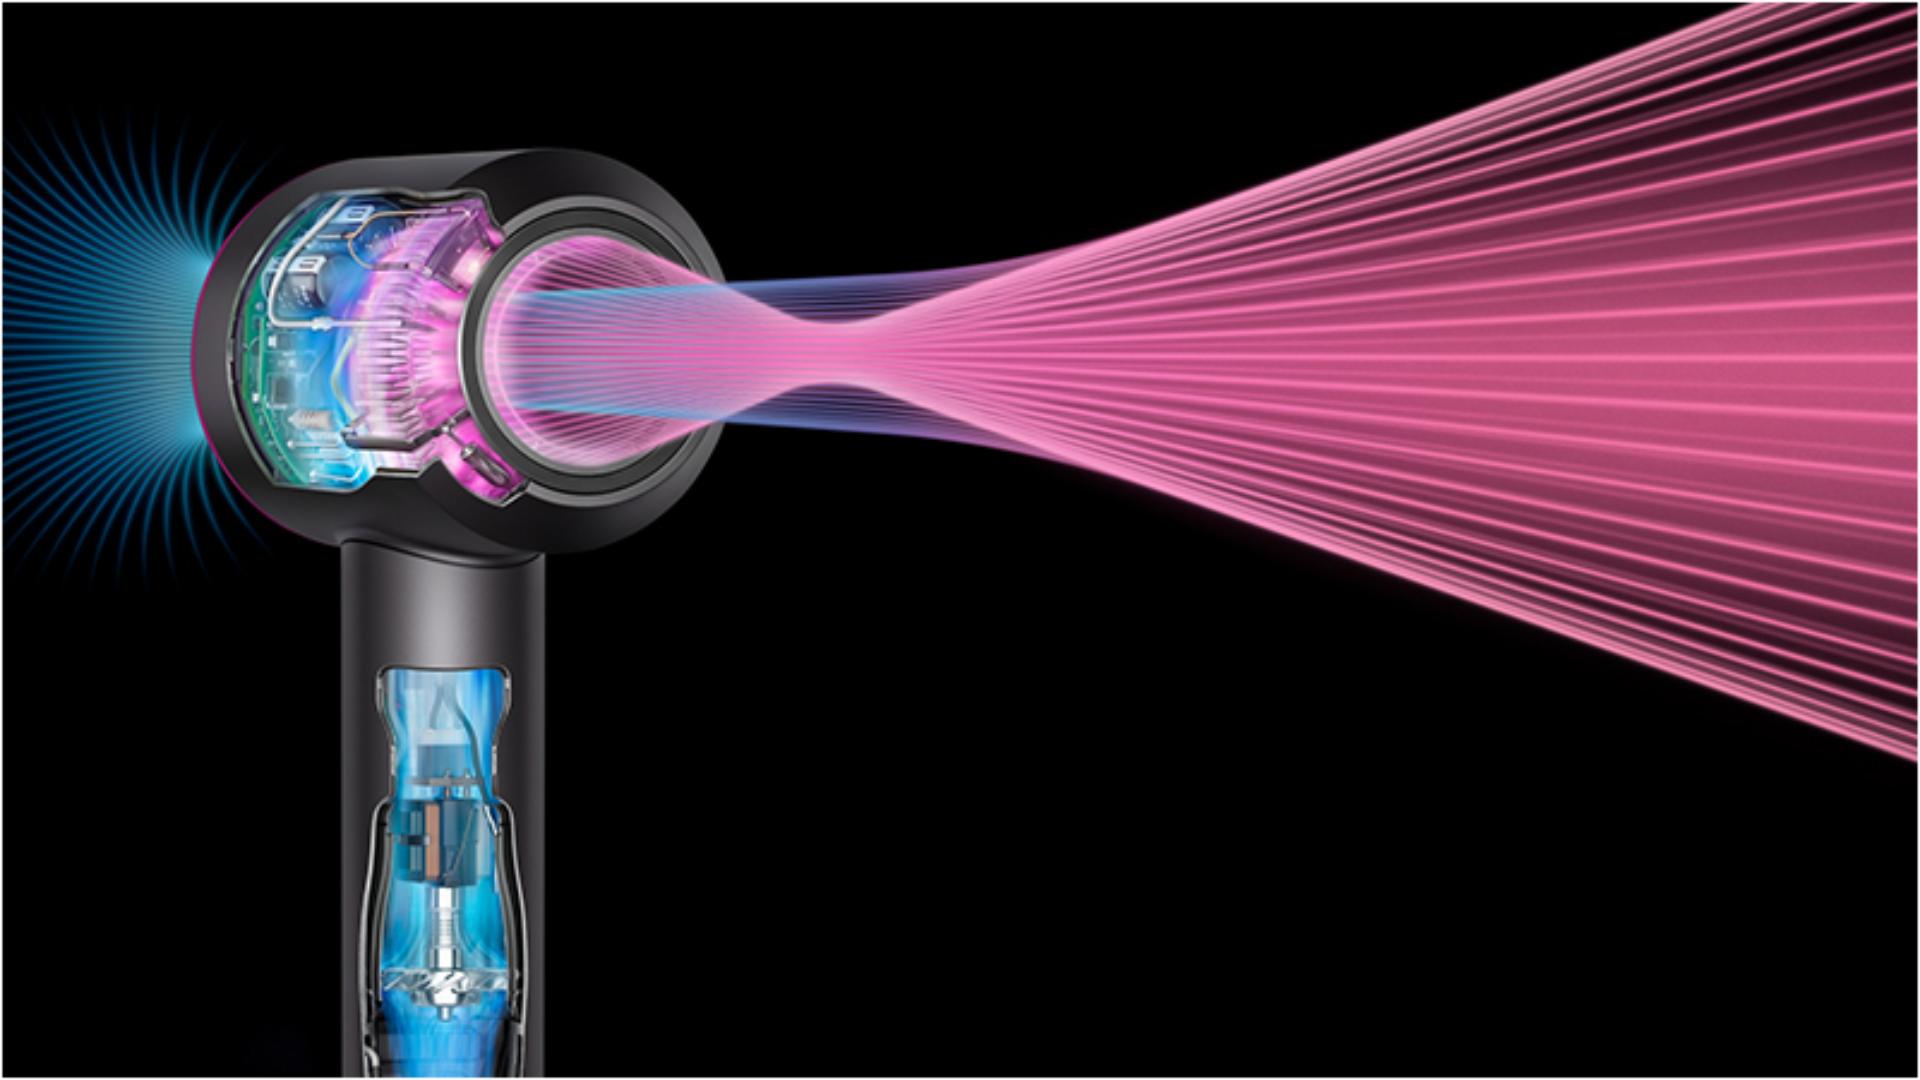 X-ray of the Dyson Supersonic hair dryer with airflow